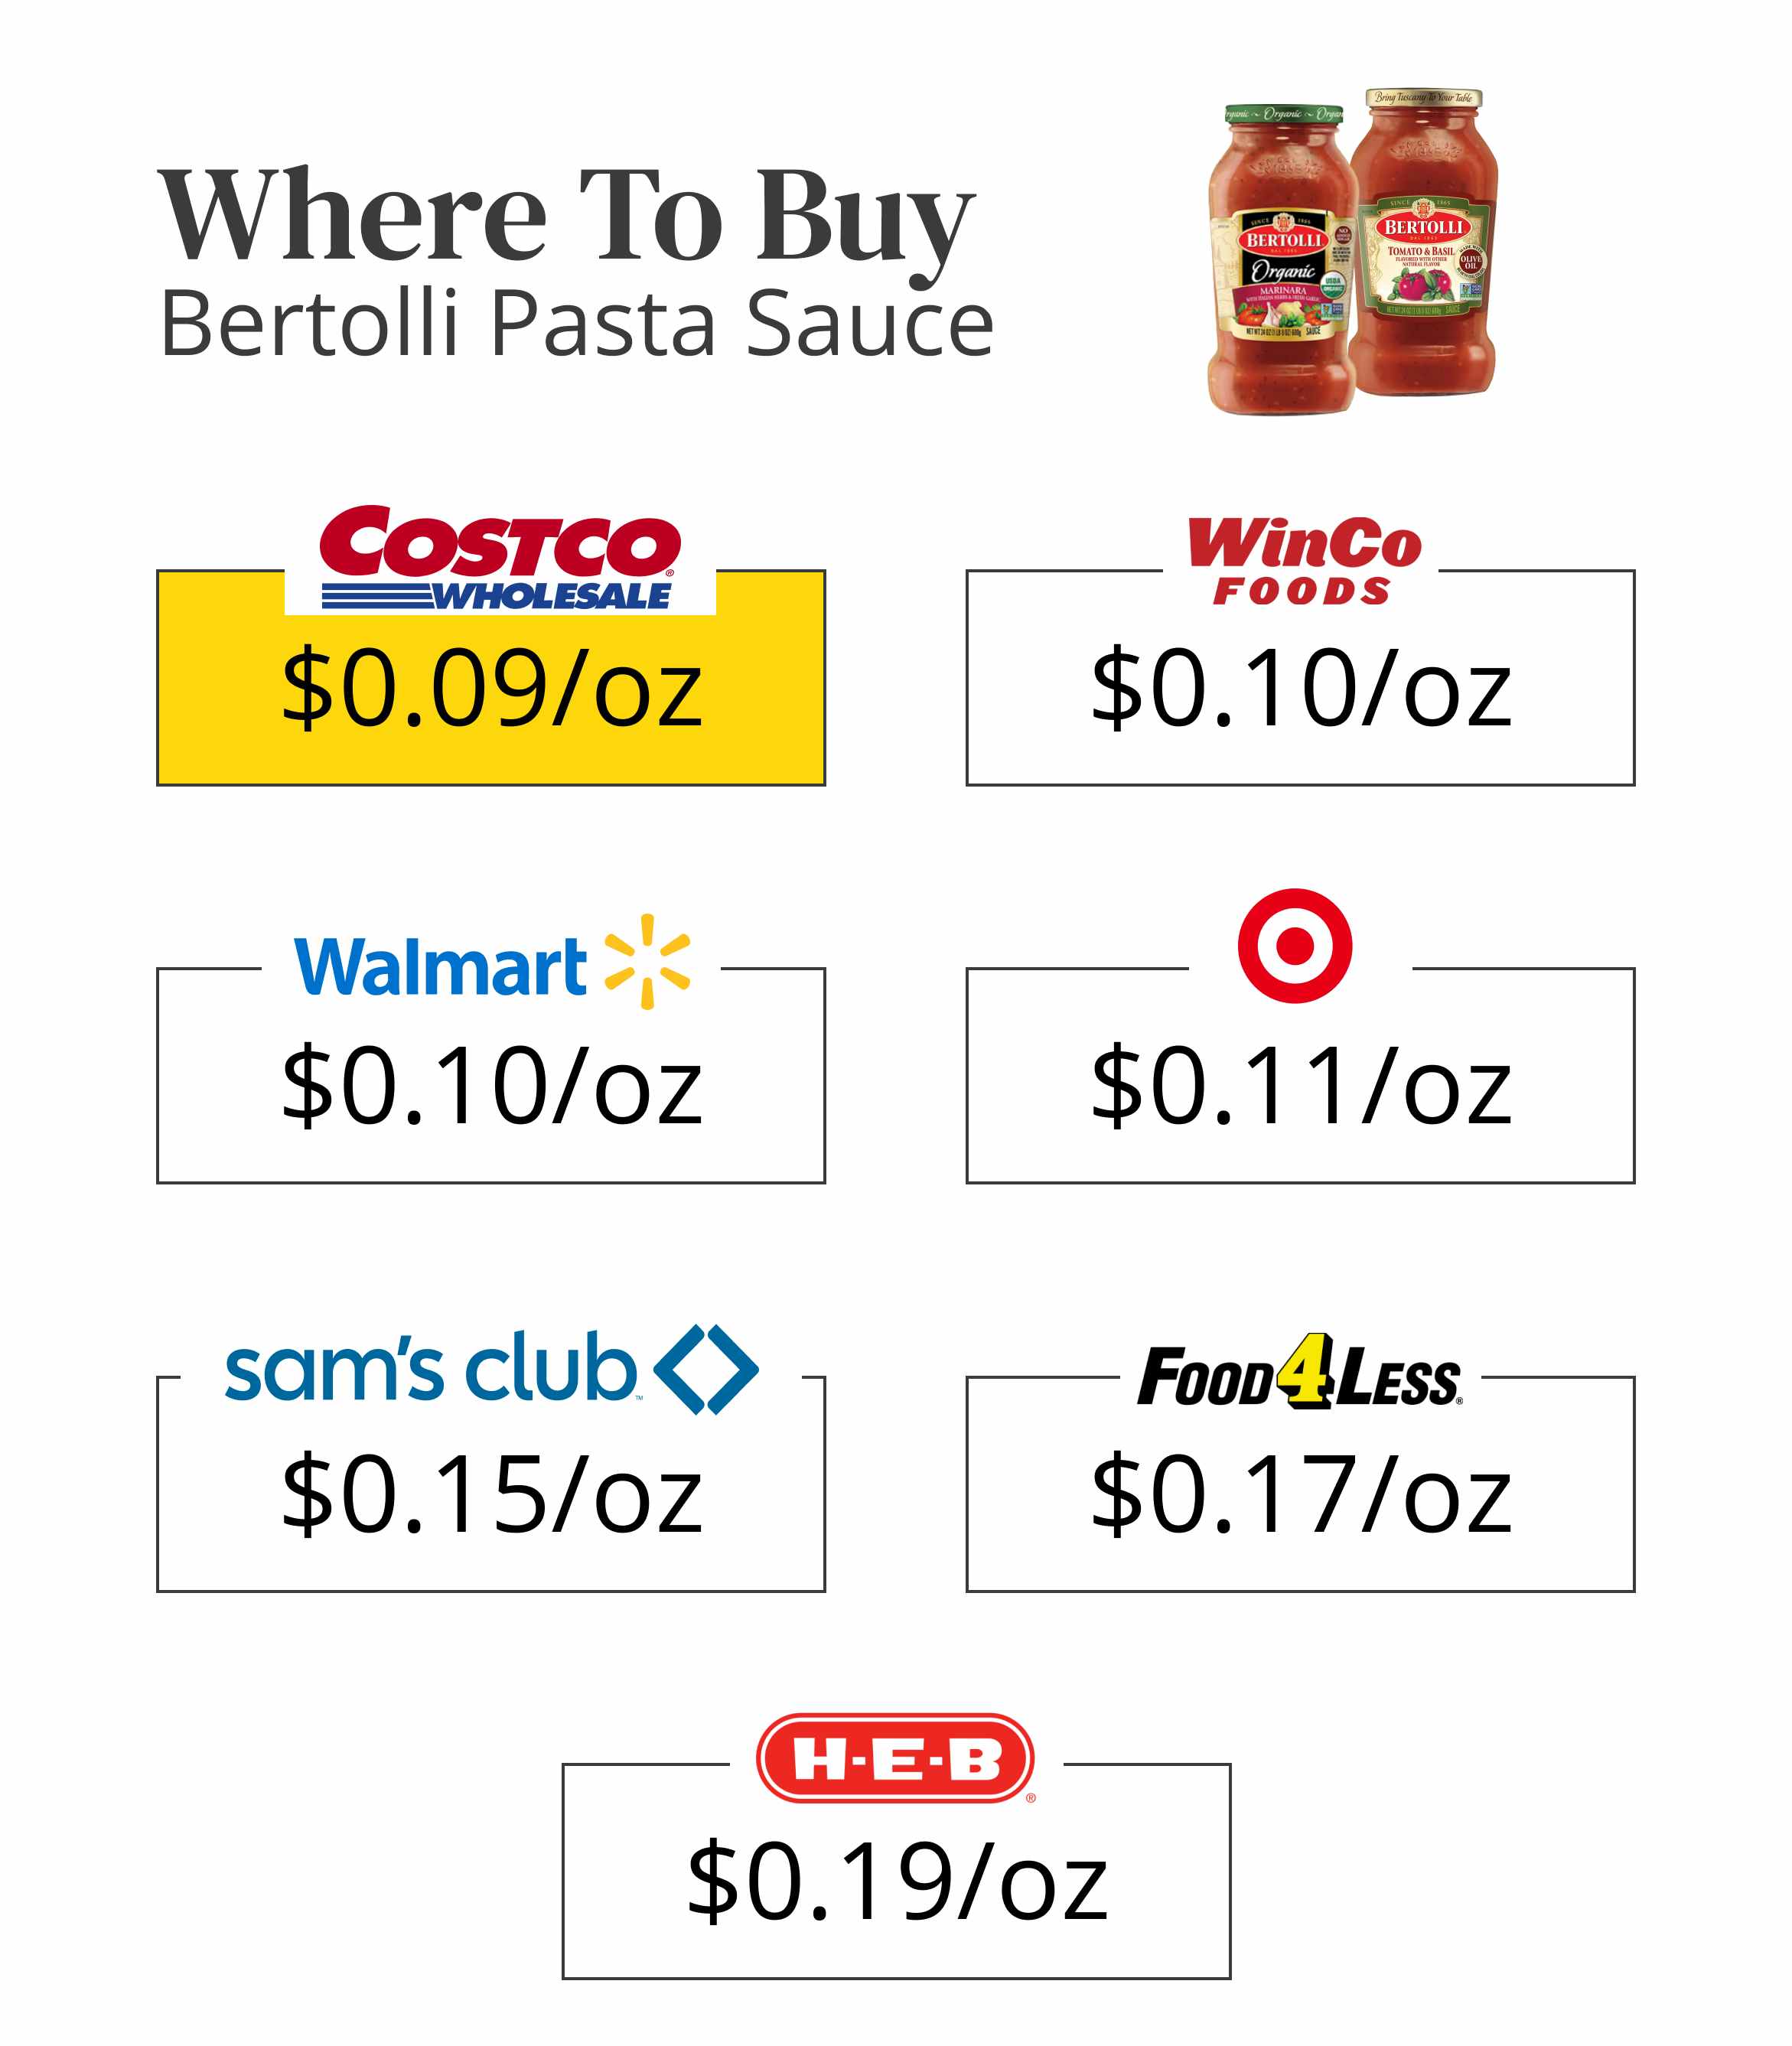 Where to buy Bertolli pasta sauce for the cheapest price per ounce.